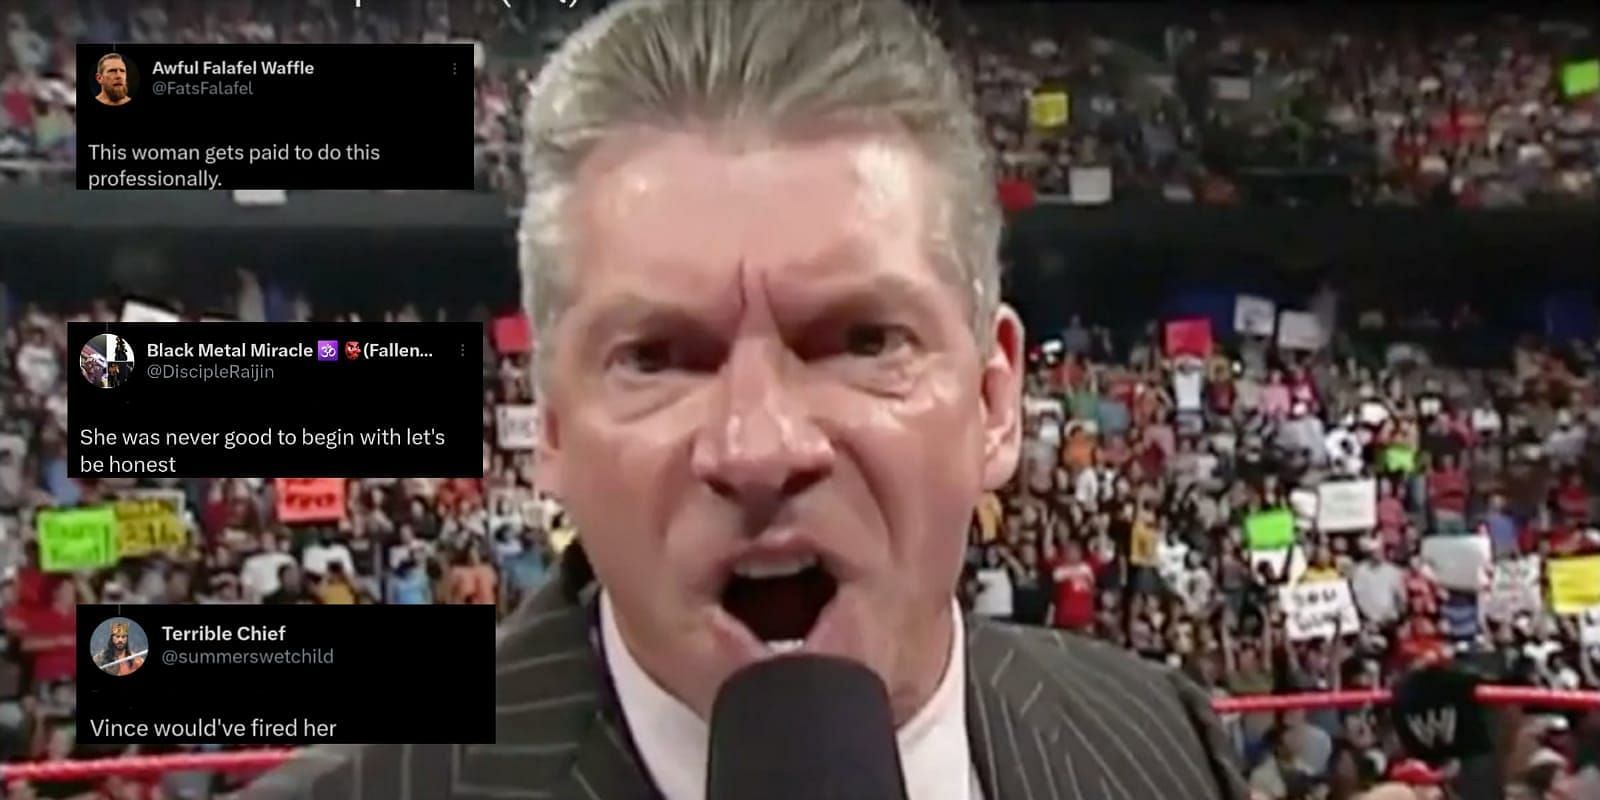 Vince McMahon is the former chairman of WWE!